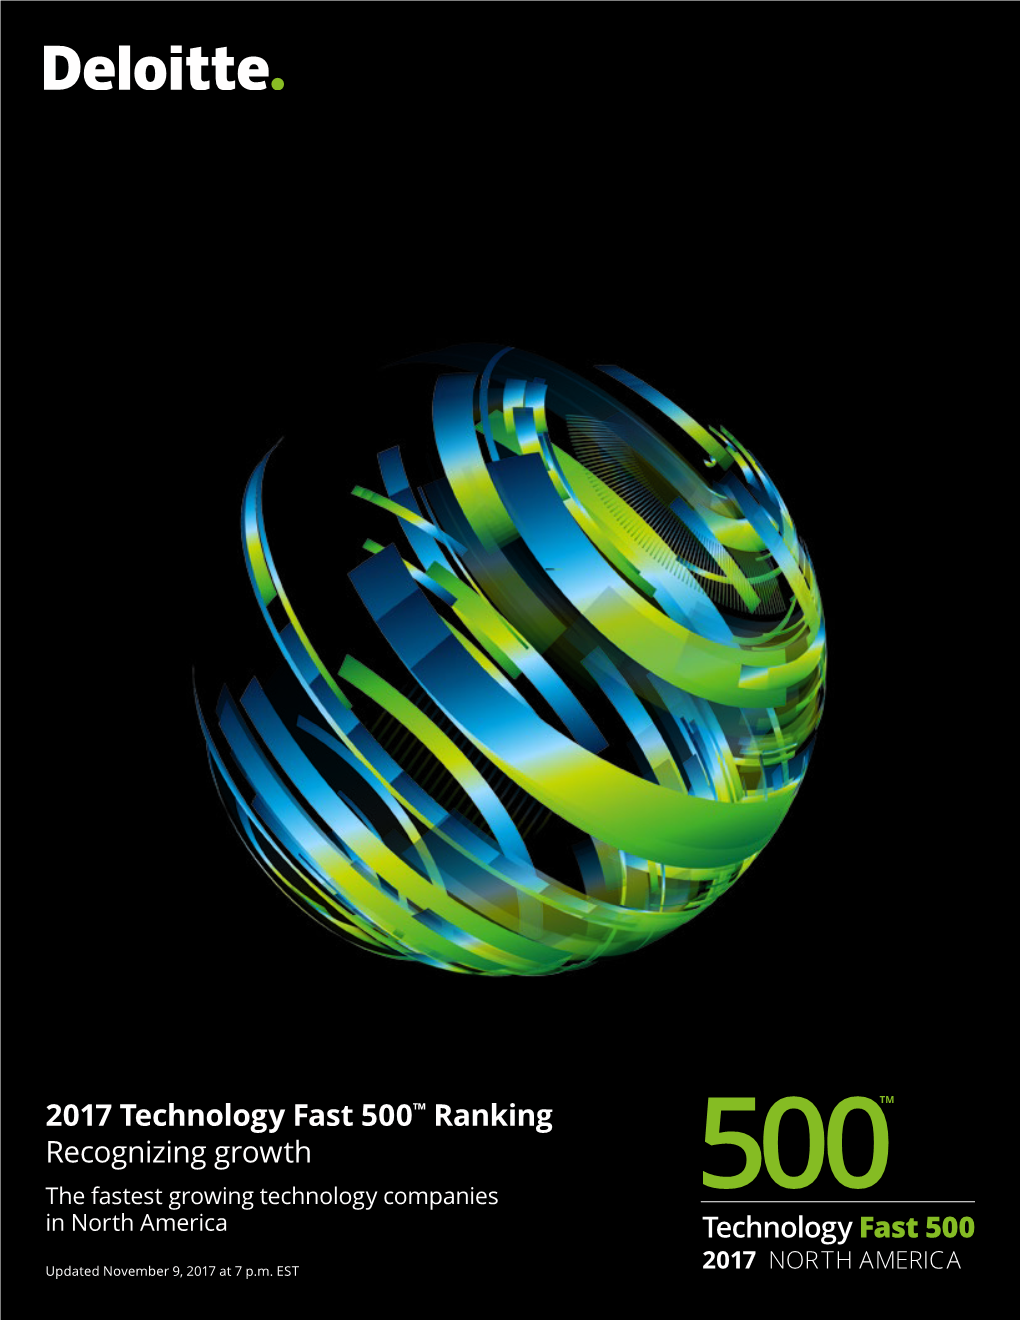 2017 Technology Fast 500™ Ranking Recognizing Growth the Fastest Growing Technology Companies 500 in North America Technology Fast 500